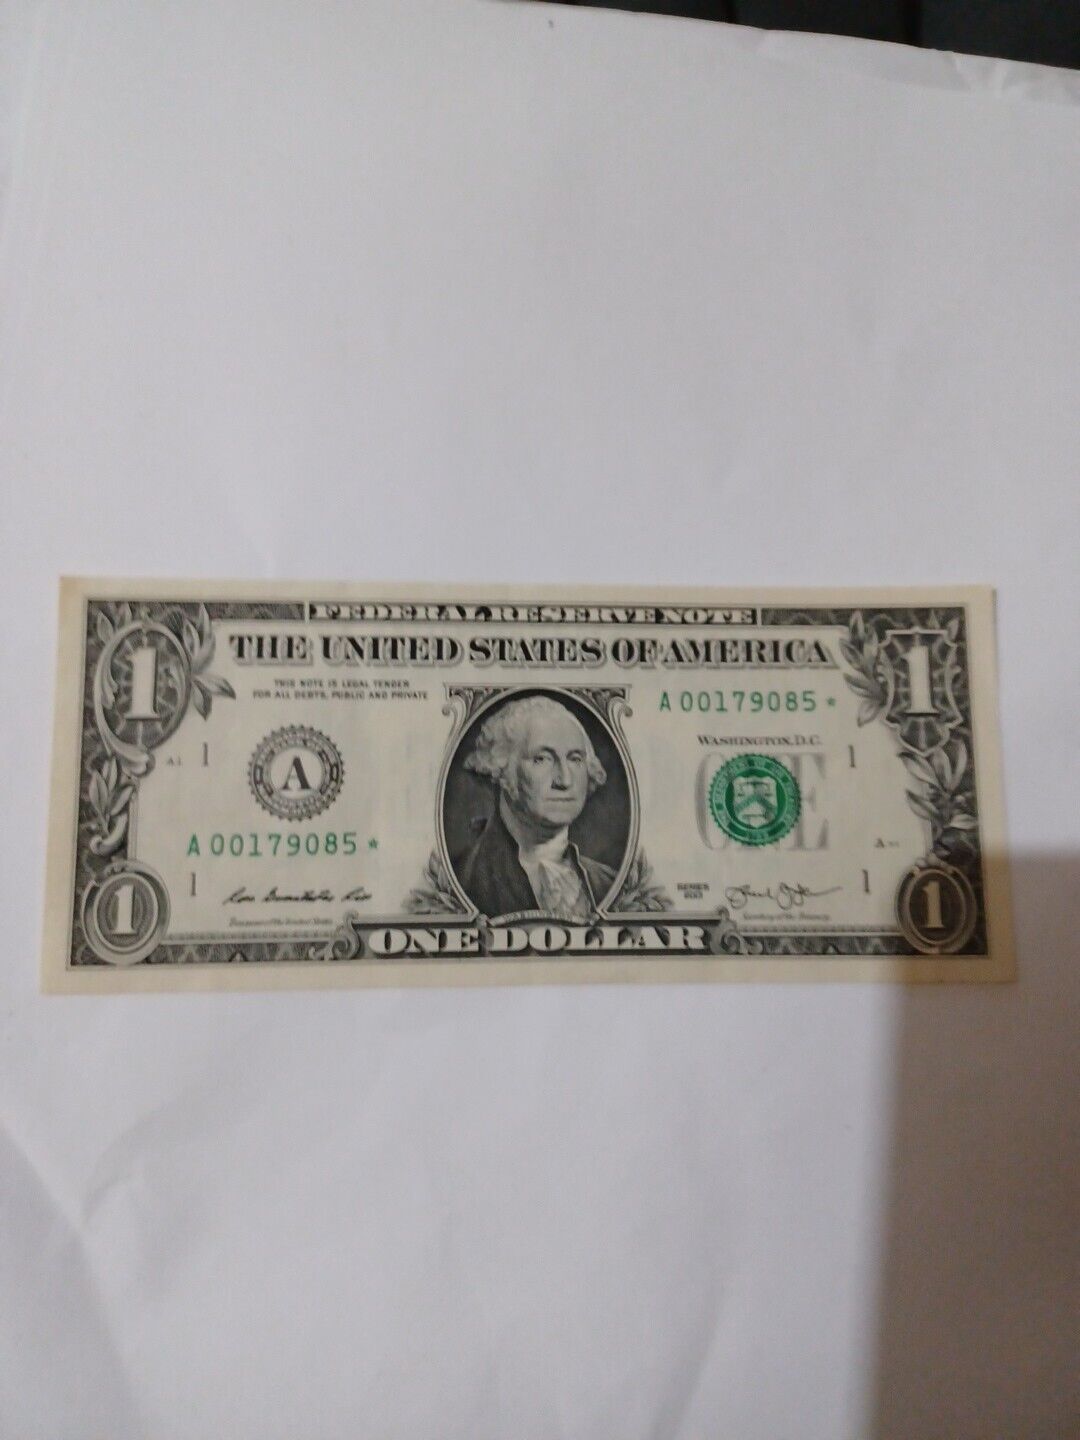 2013 A STAR NOTE EXTRA CLEAN NO FOLDS OR BENDS A00179085